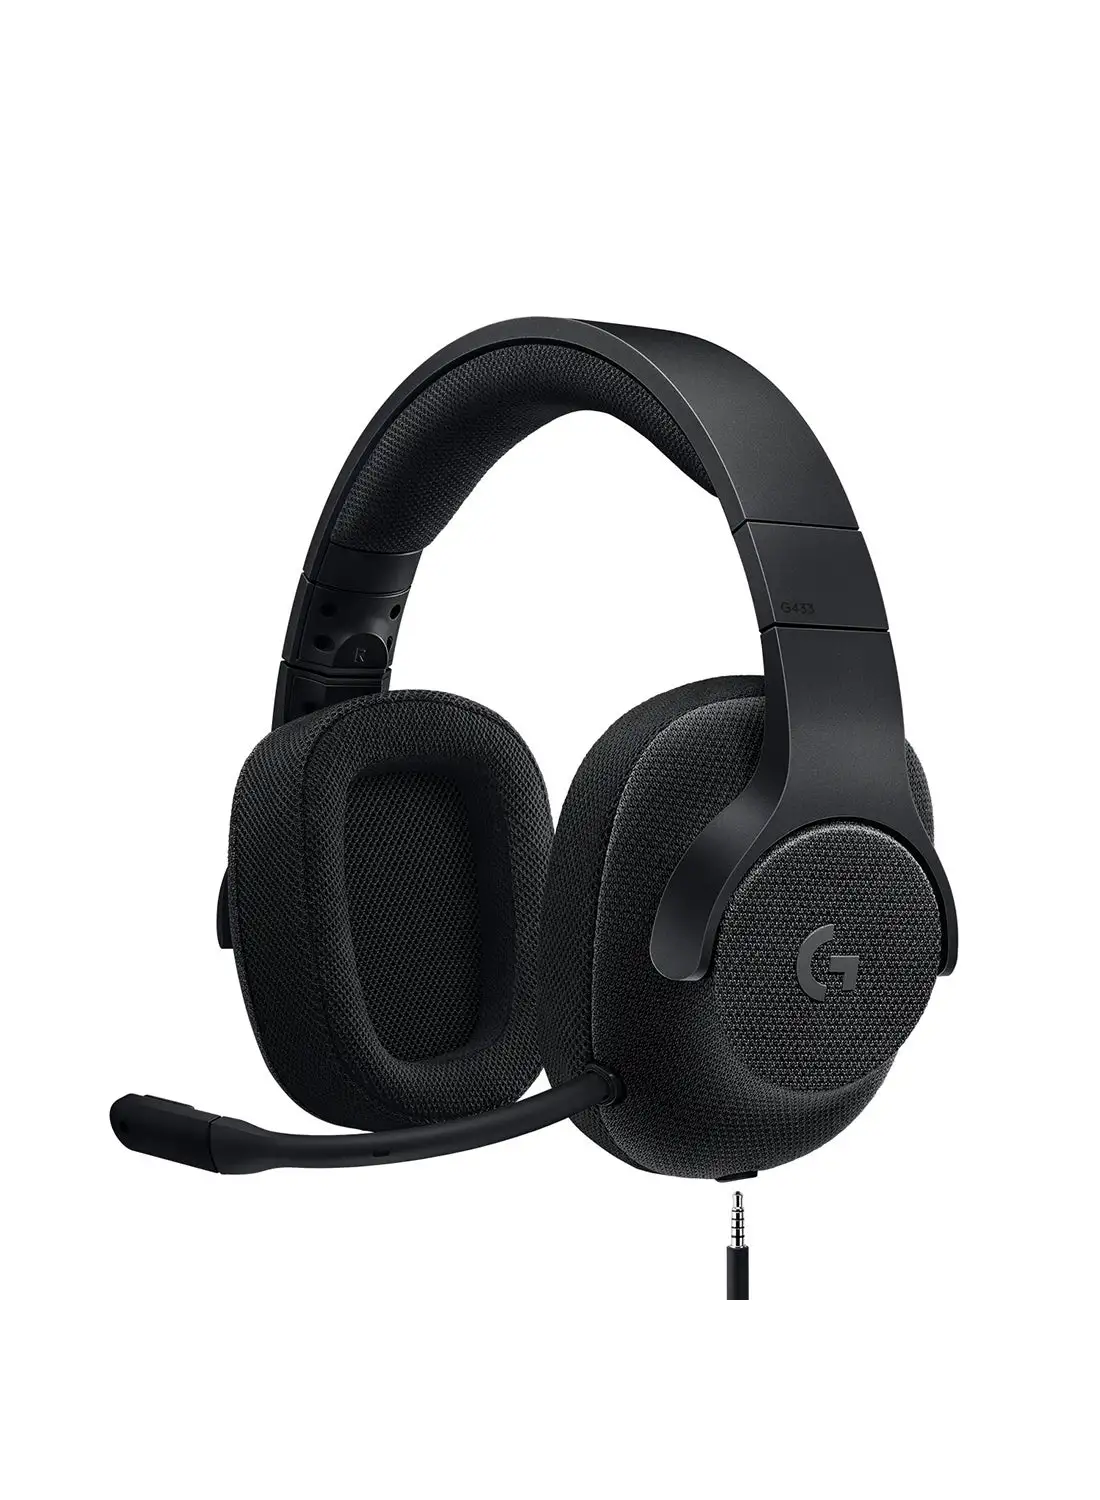 Logitech G433 Wired Gaming Headset, 7.1 Surround Sound, DTS Headphone:X, 40 mm Pro-G Audio Drivers, Lightweight, USB And 3.5 mm Jack,PC, Xbox One, Xbox Series X|S, PS5, PS4, Nintendo Switch